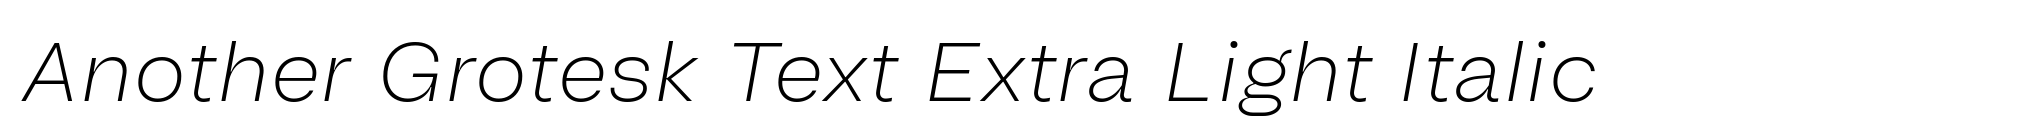 Another Grotesk Text Extra Light Italic image